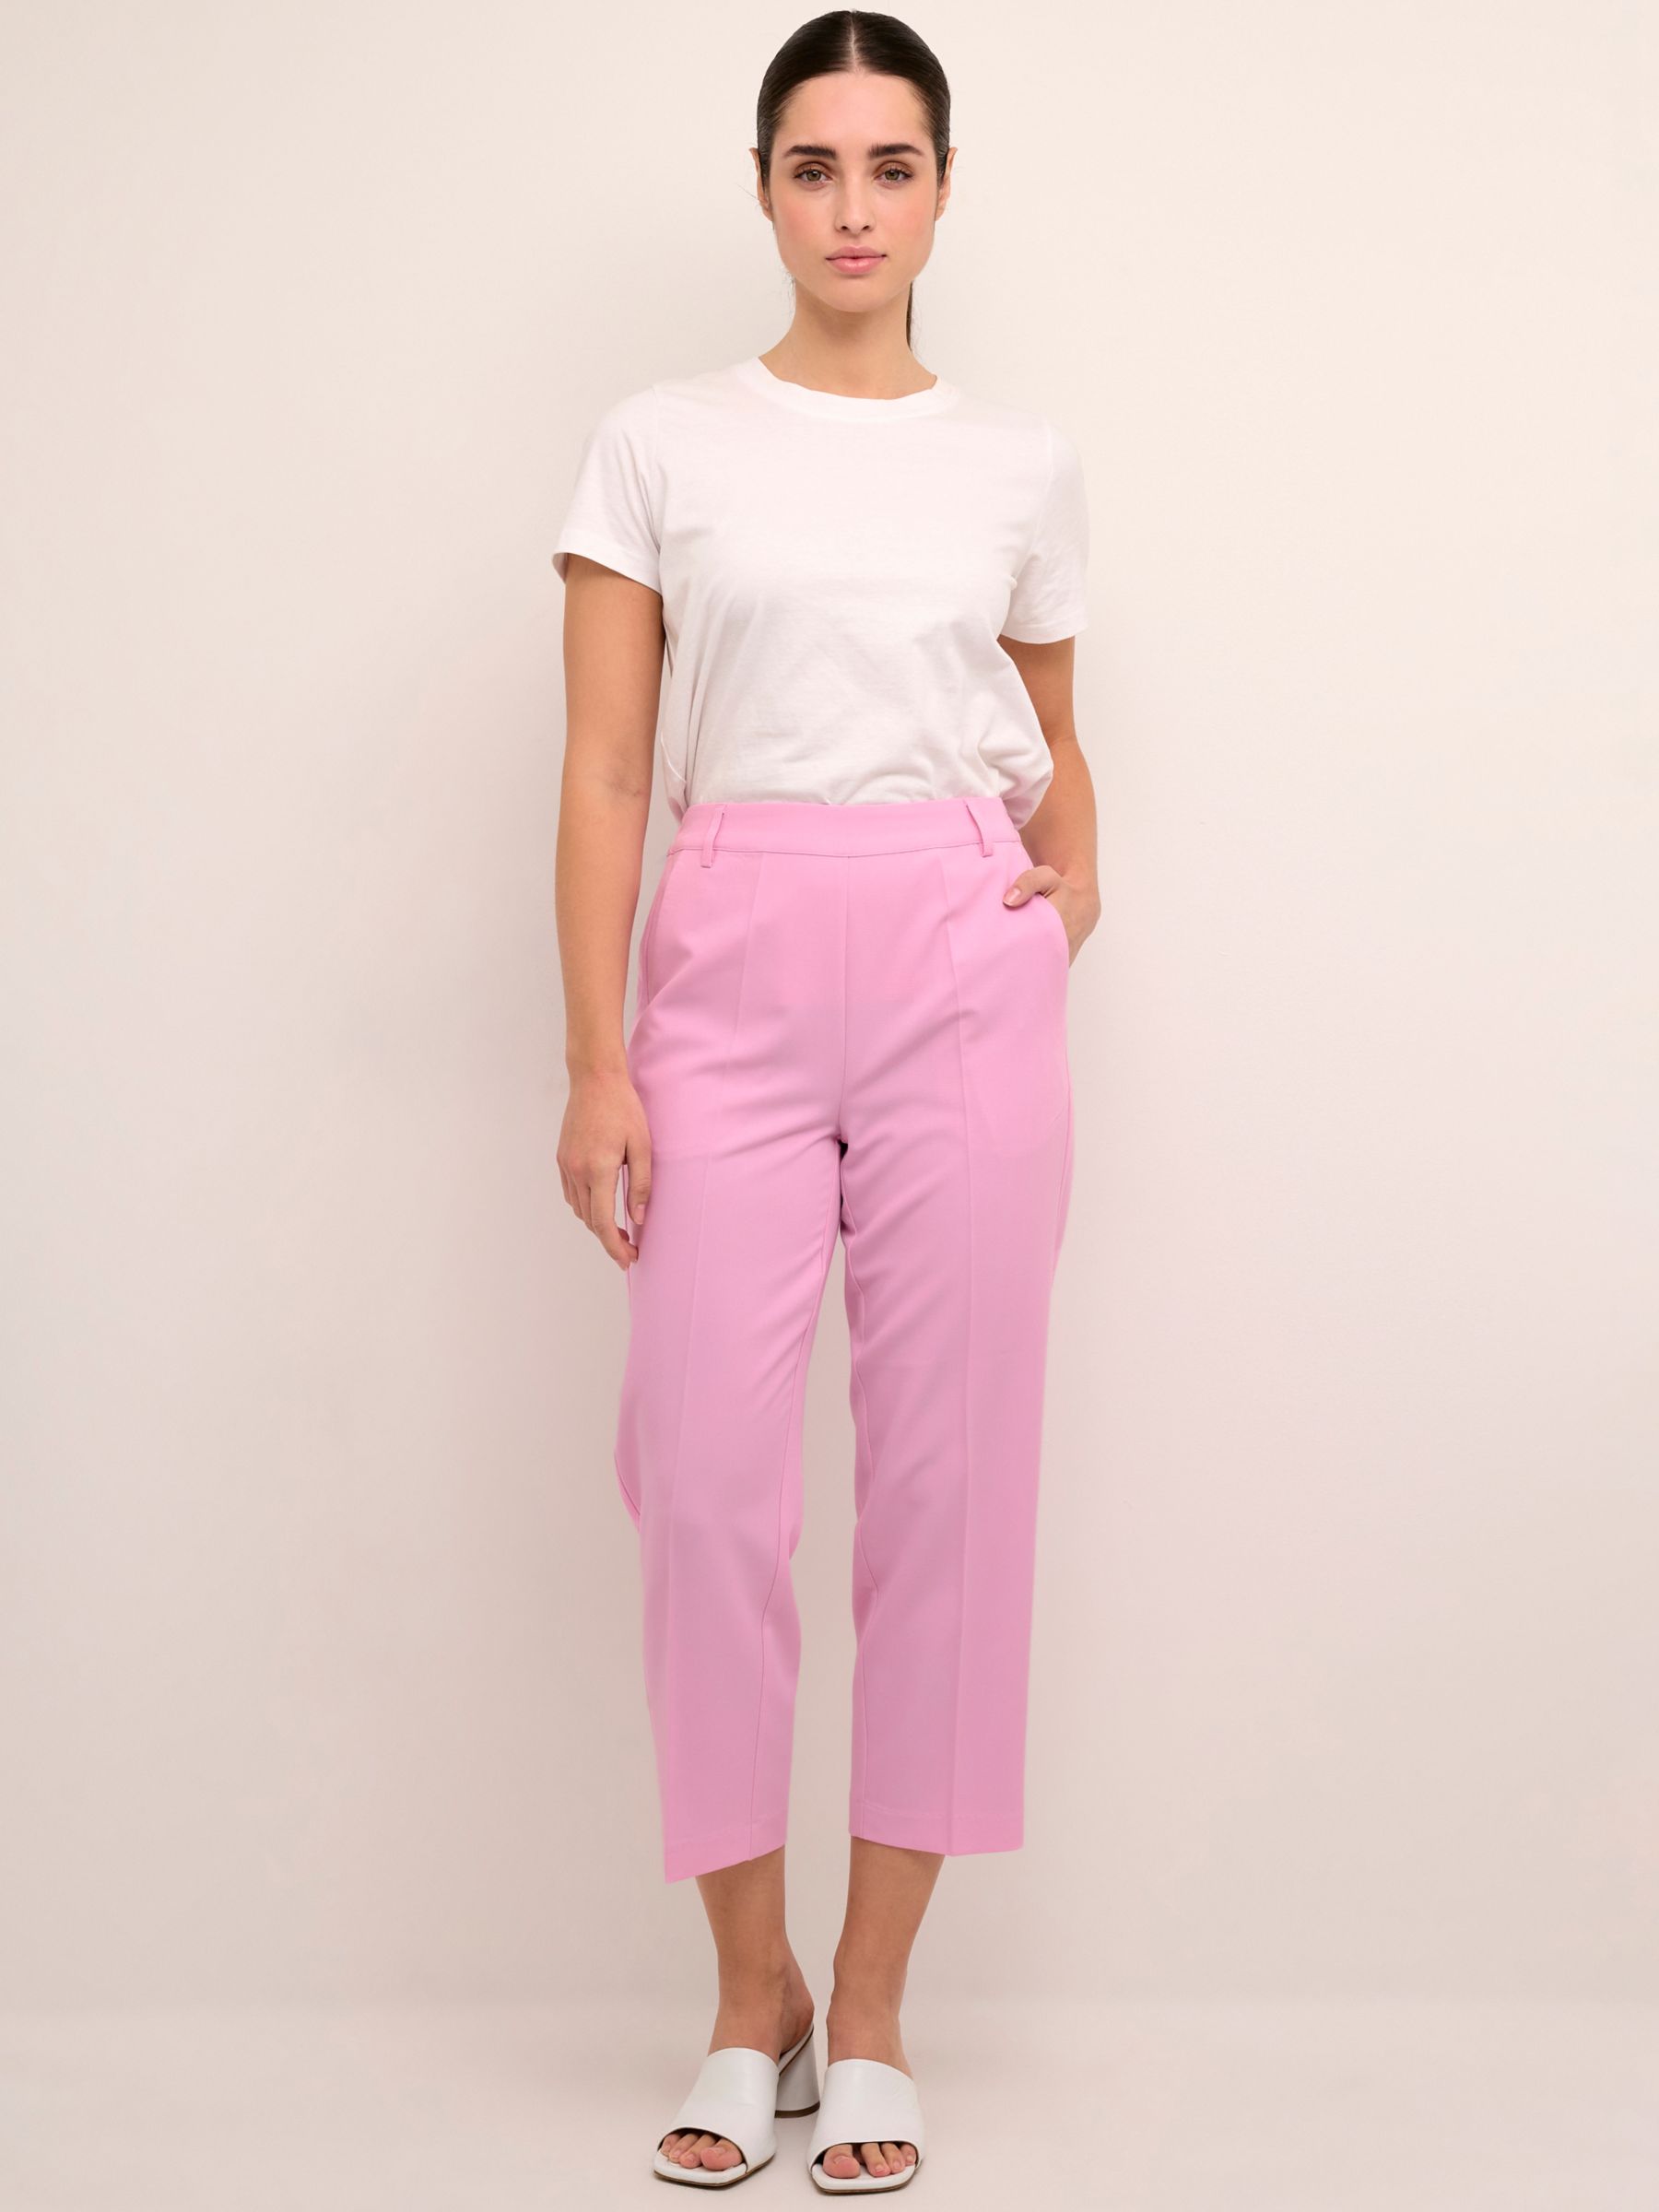 Buy Women's Pink Cropped Trousers Online